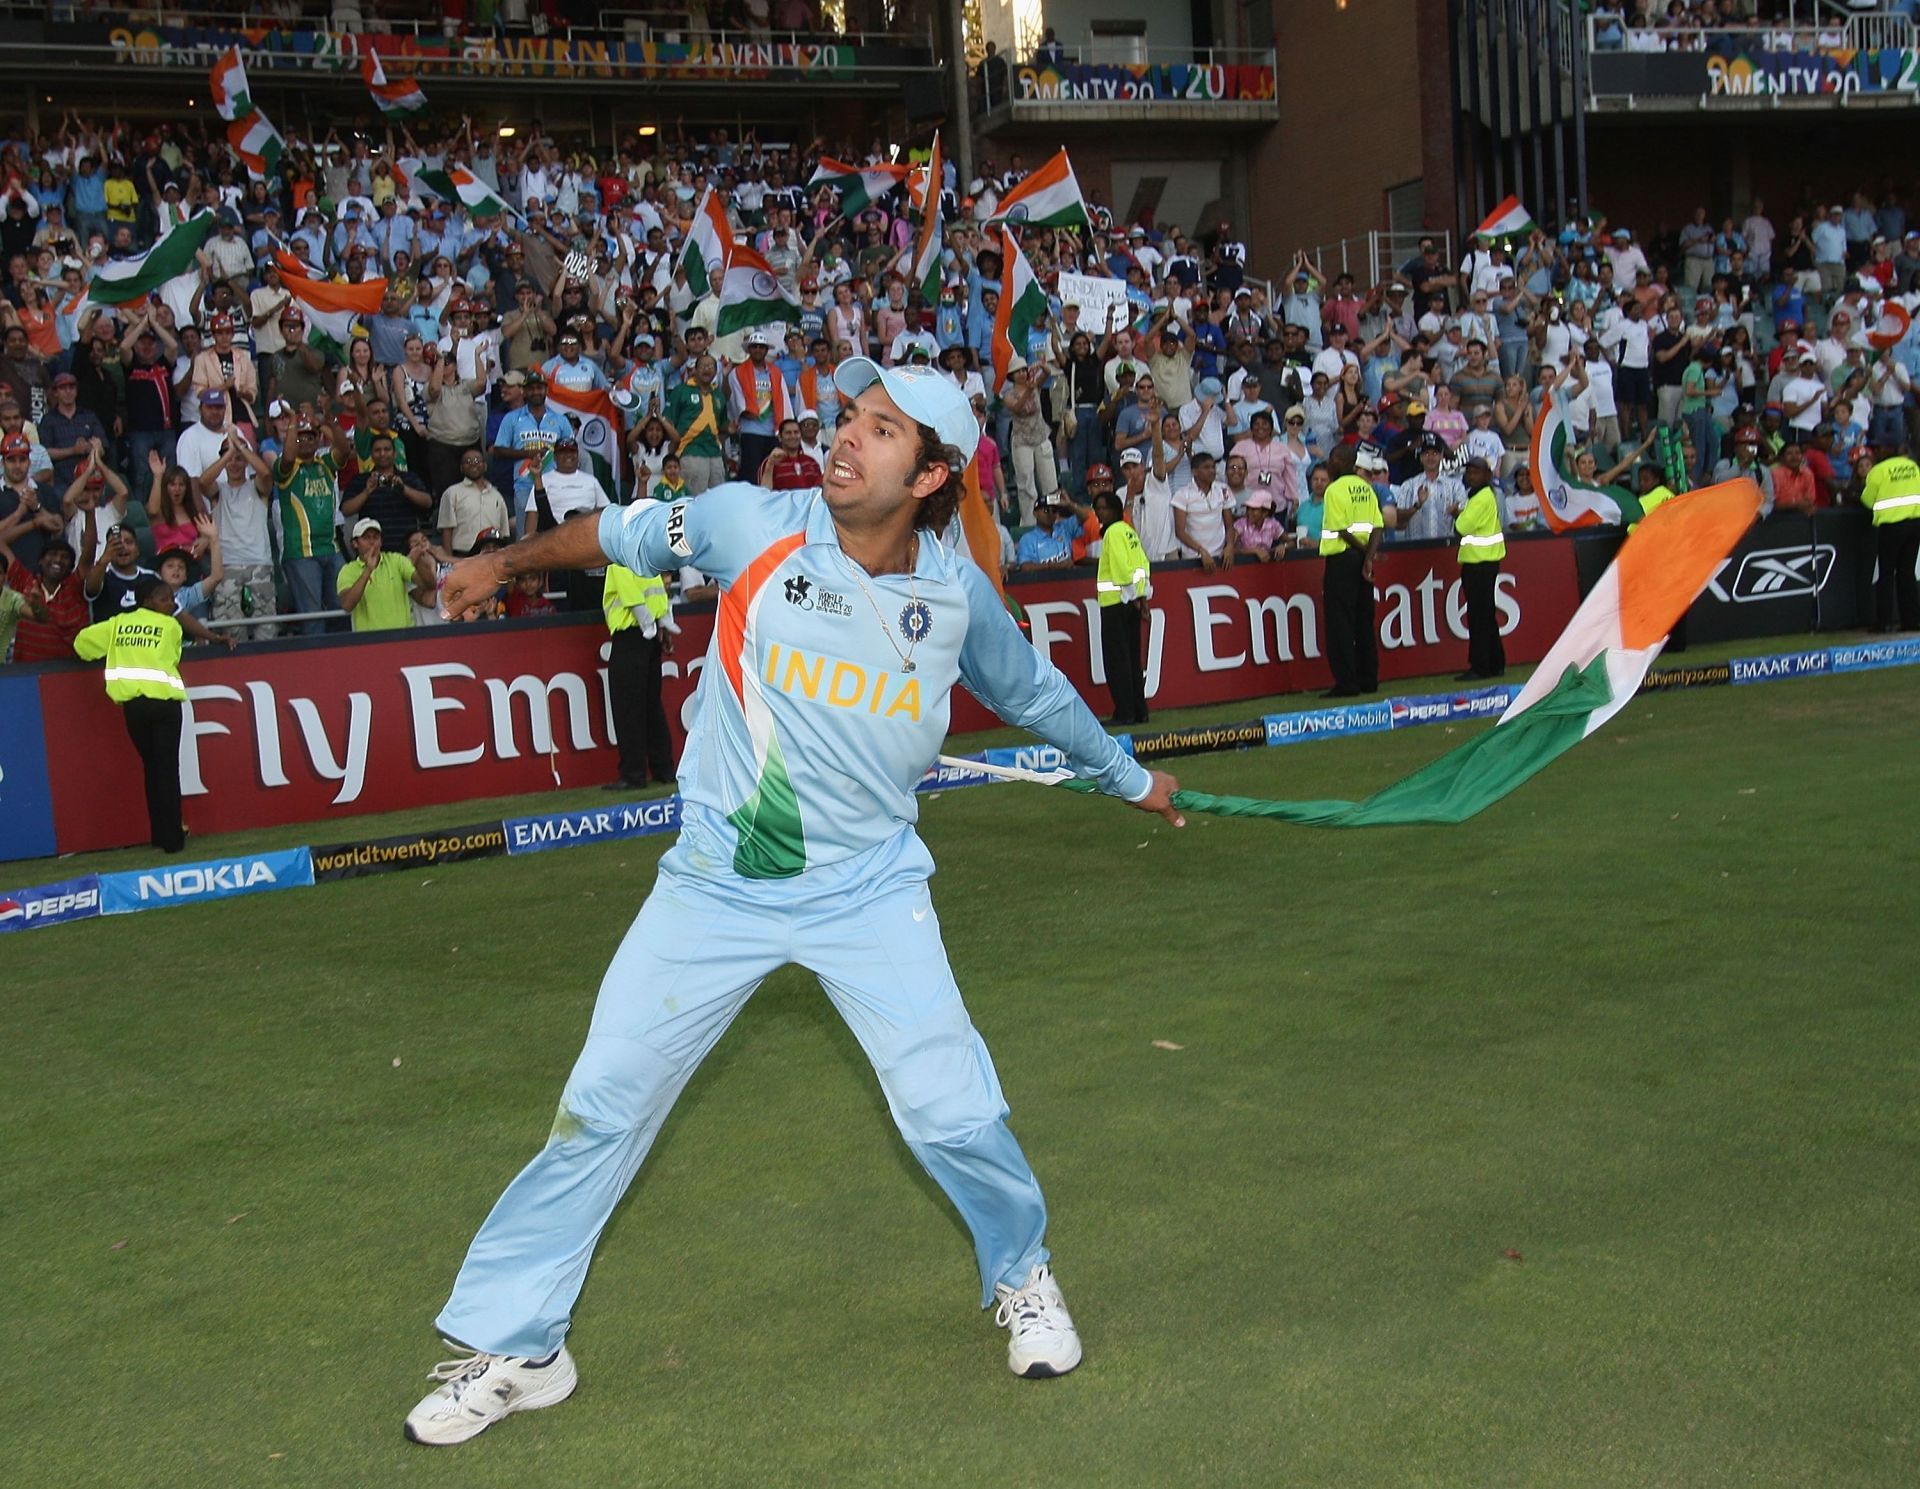 Yuvraj Singh set a world record for the fastest T20I fifty against England (Image: Getty)